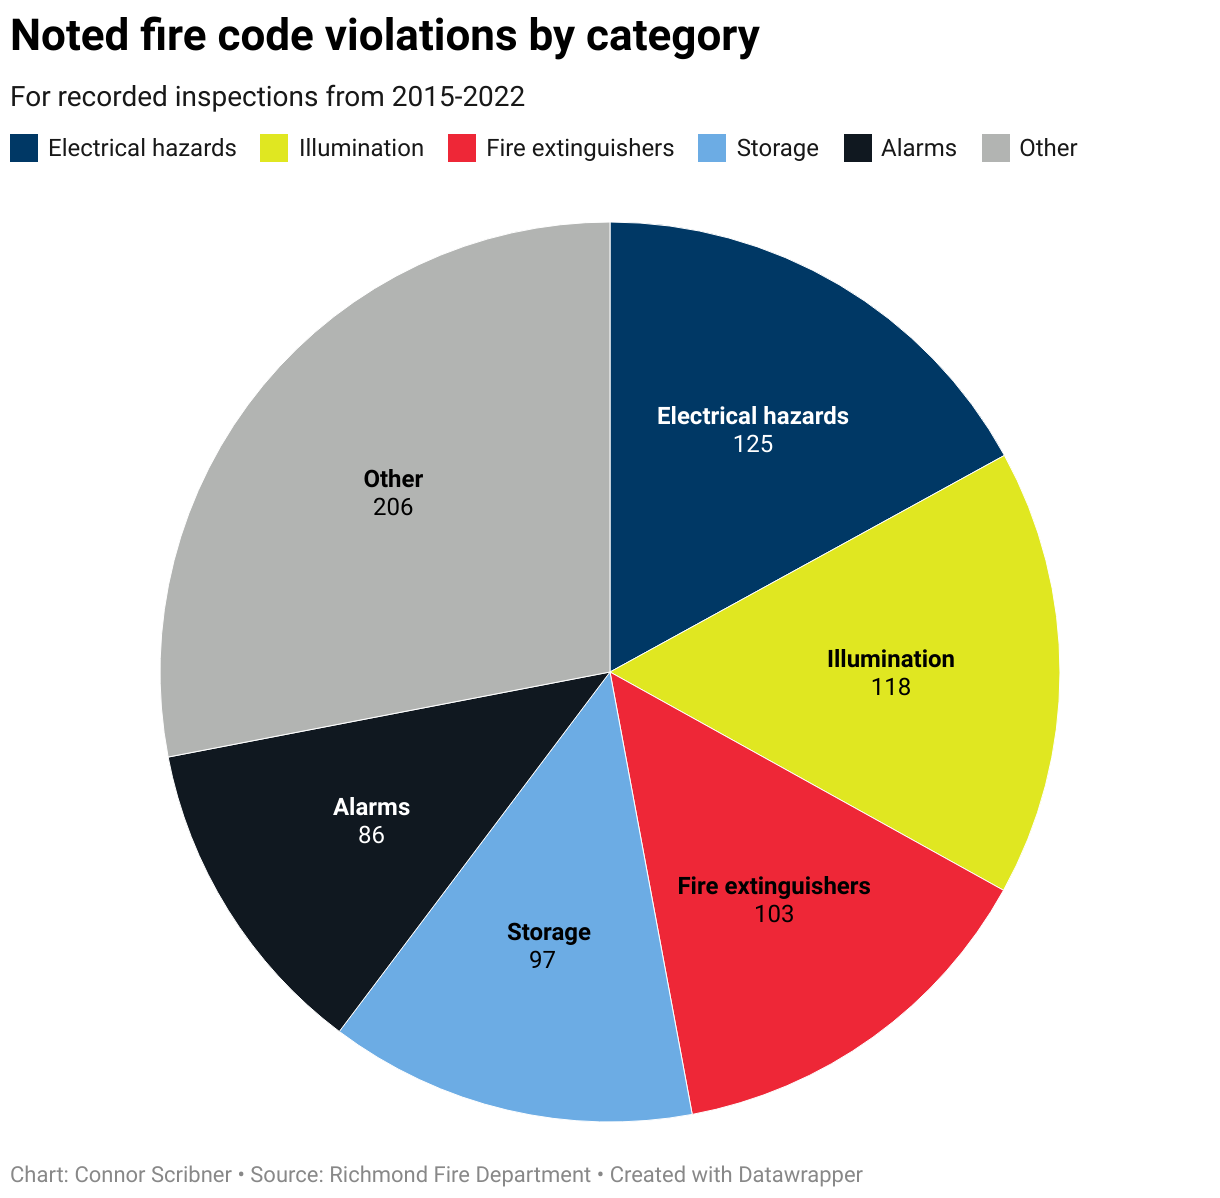 A pie chart showing common types of fire code violations found in Richmond school. Electrical hazards: 124; illumination: 118; fire extinguishers: 102; Storage: 97; Alarms: 86; Other: 205